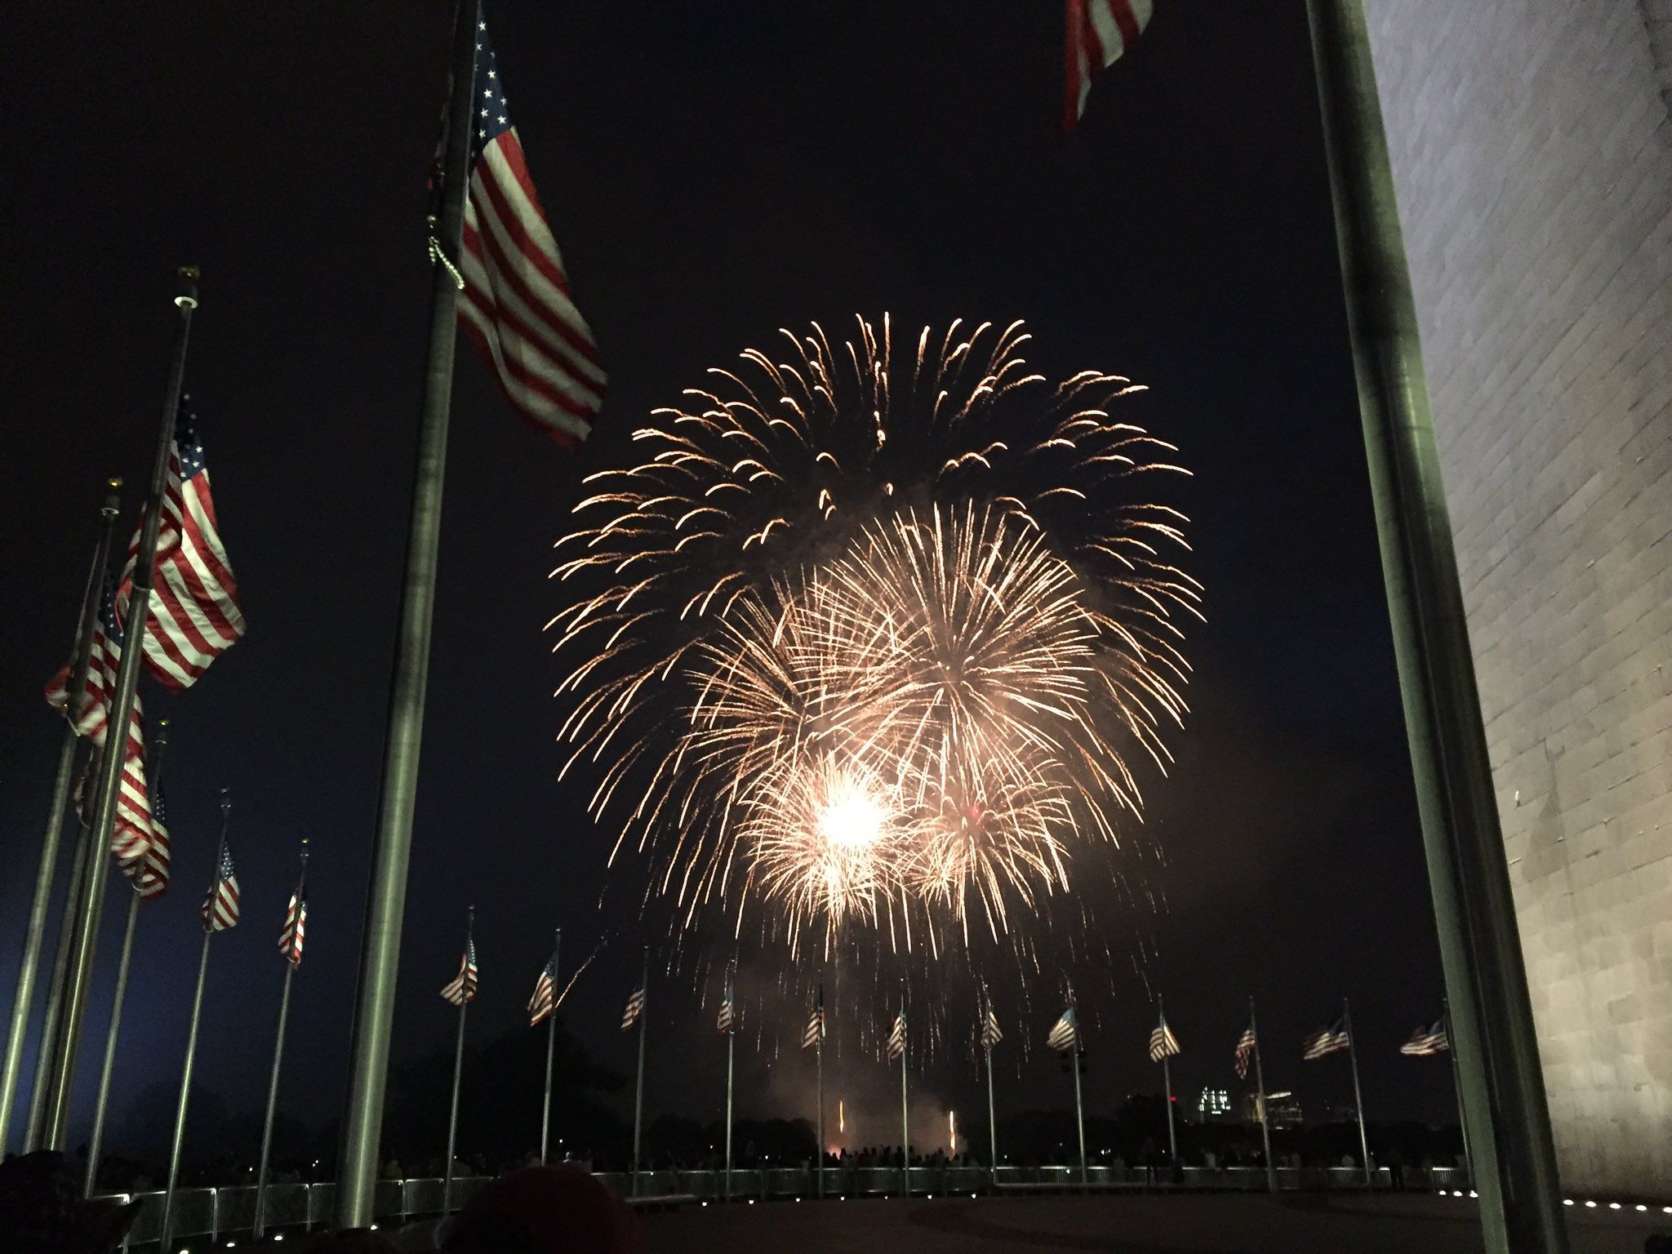 Fireworks light up the skies over the National Mall on Tuesday. (WTOP/Michelle Basch)